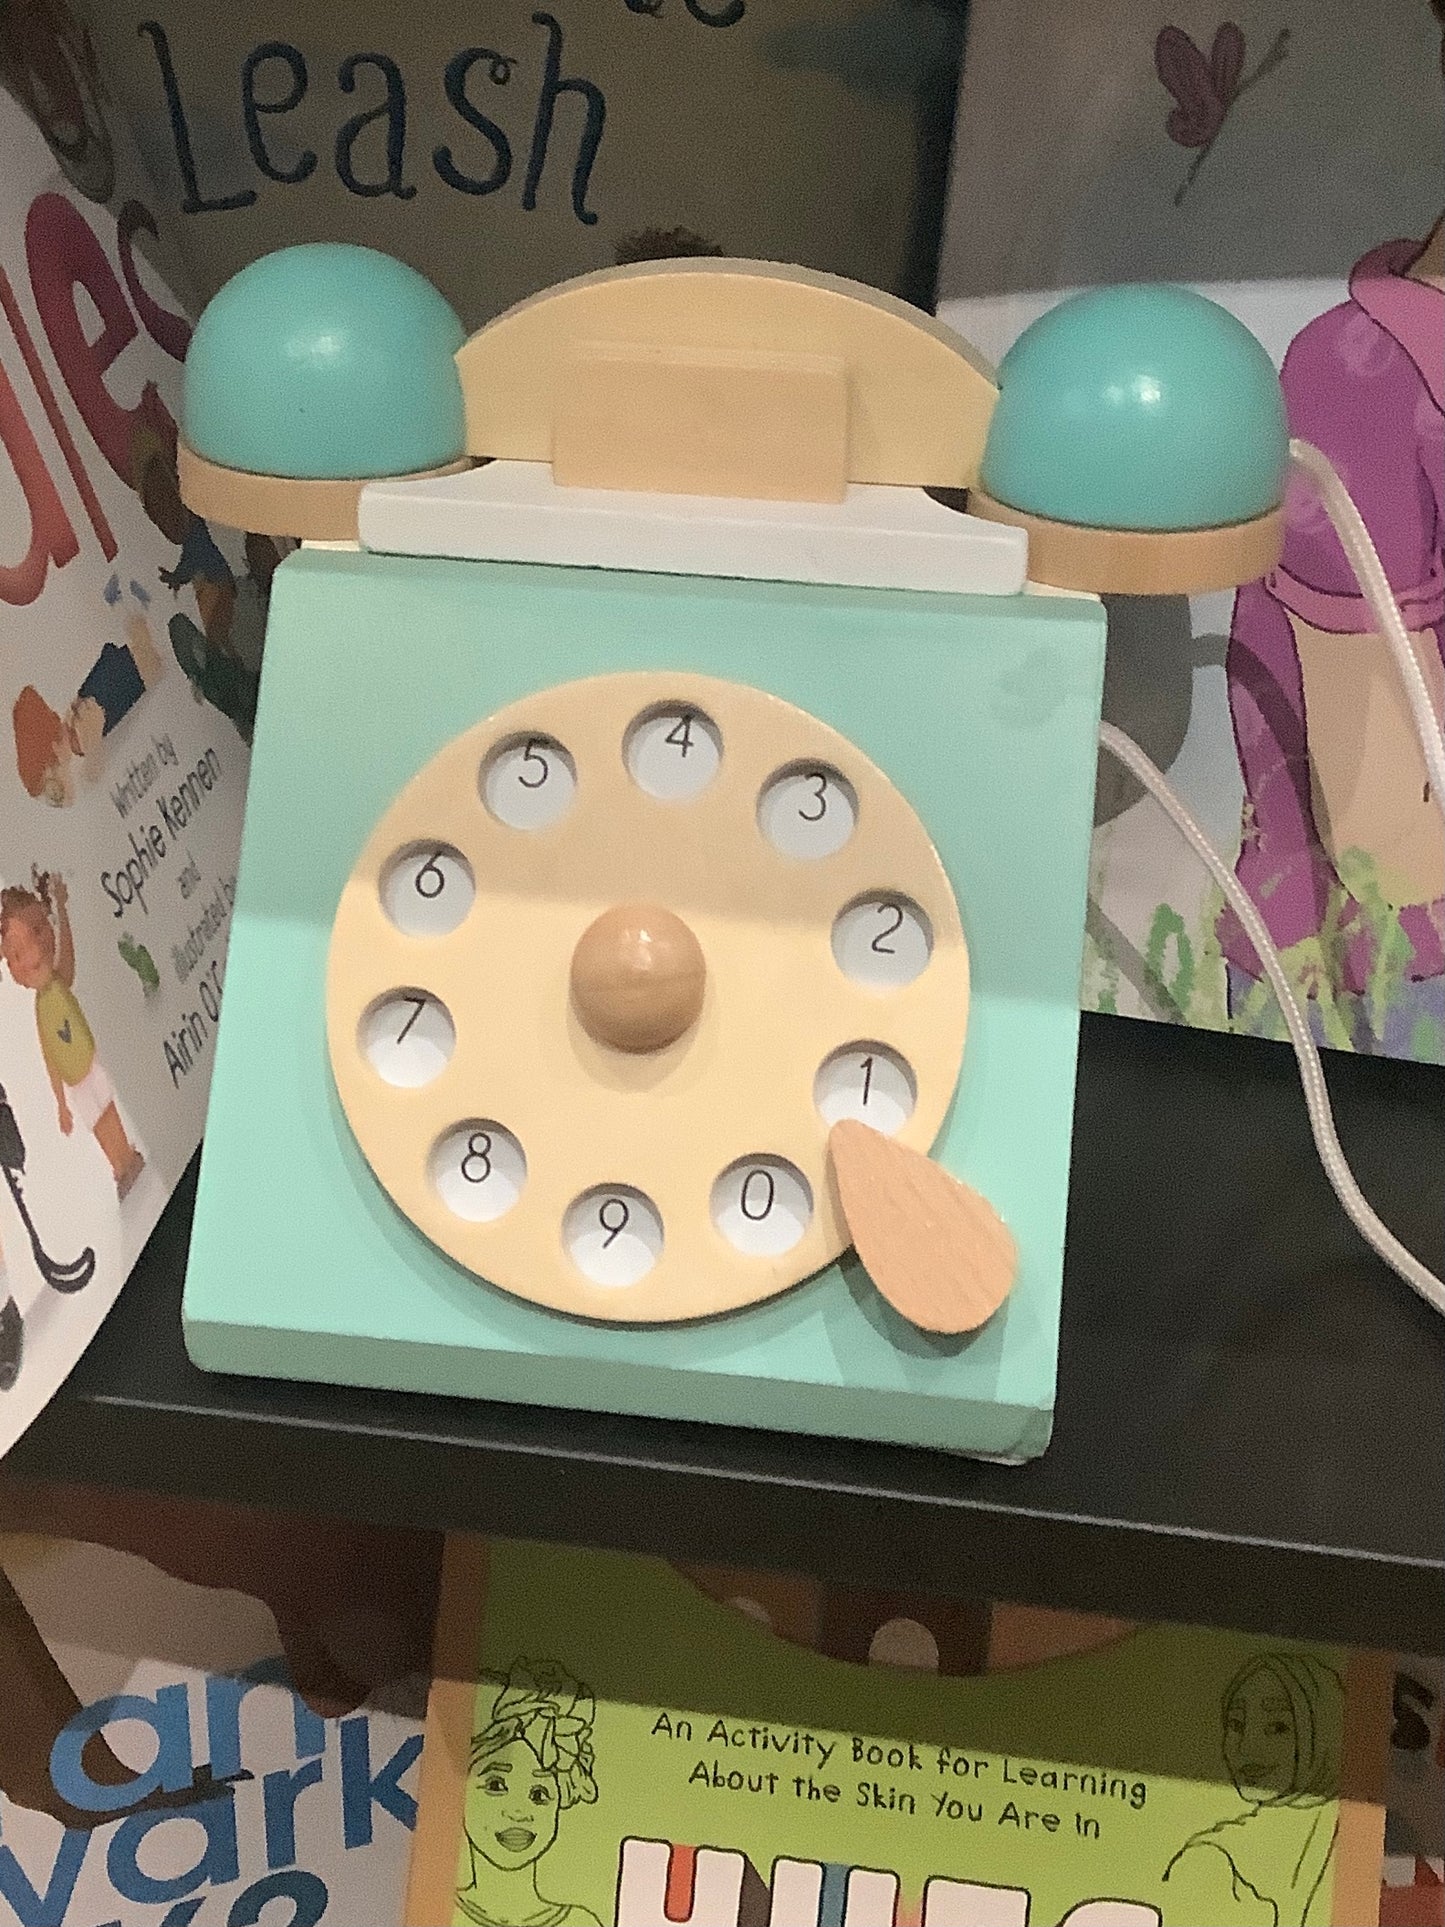 Wooden Rotary Dial Phone Toy